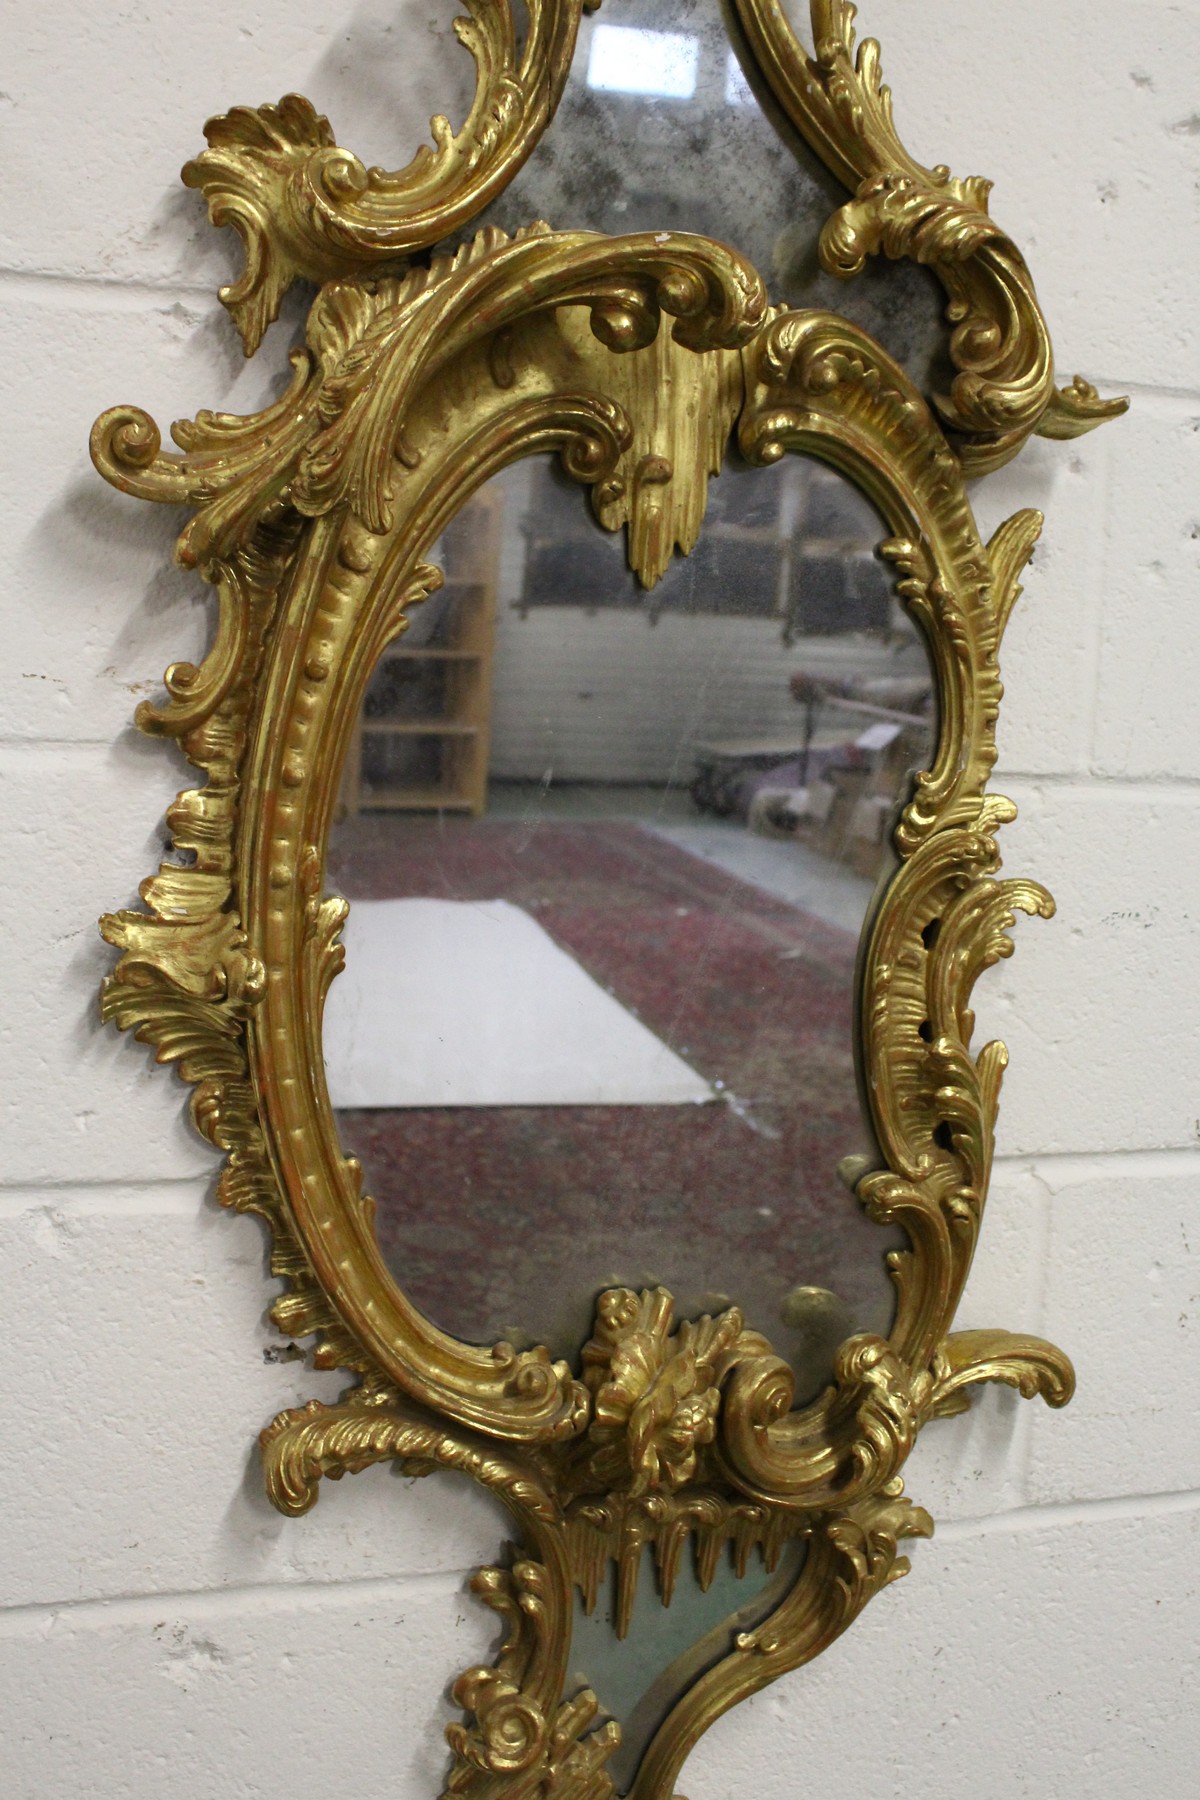 A GOOD CHIPPENDALE CARVED AND GILDED ROCOCO DESIGN MIRROR with scrolls and foliage. 4ft 10ins high x - Image 3 of 4